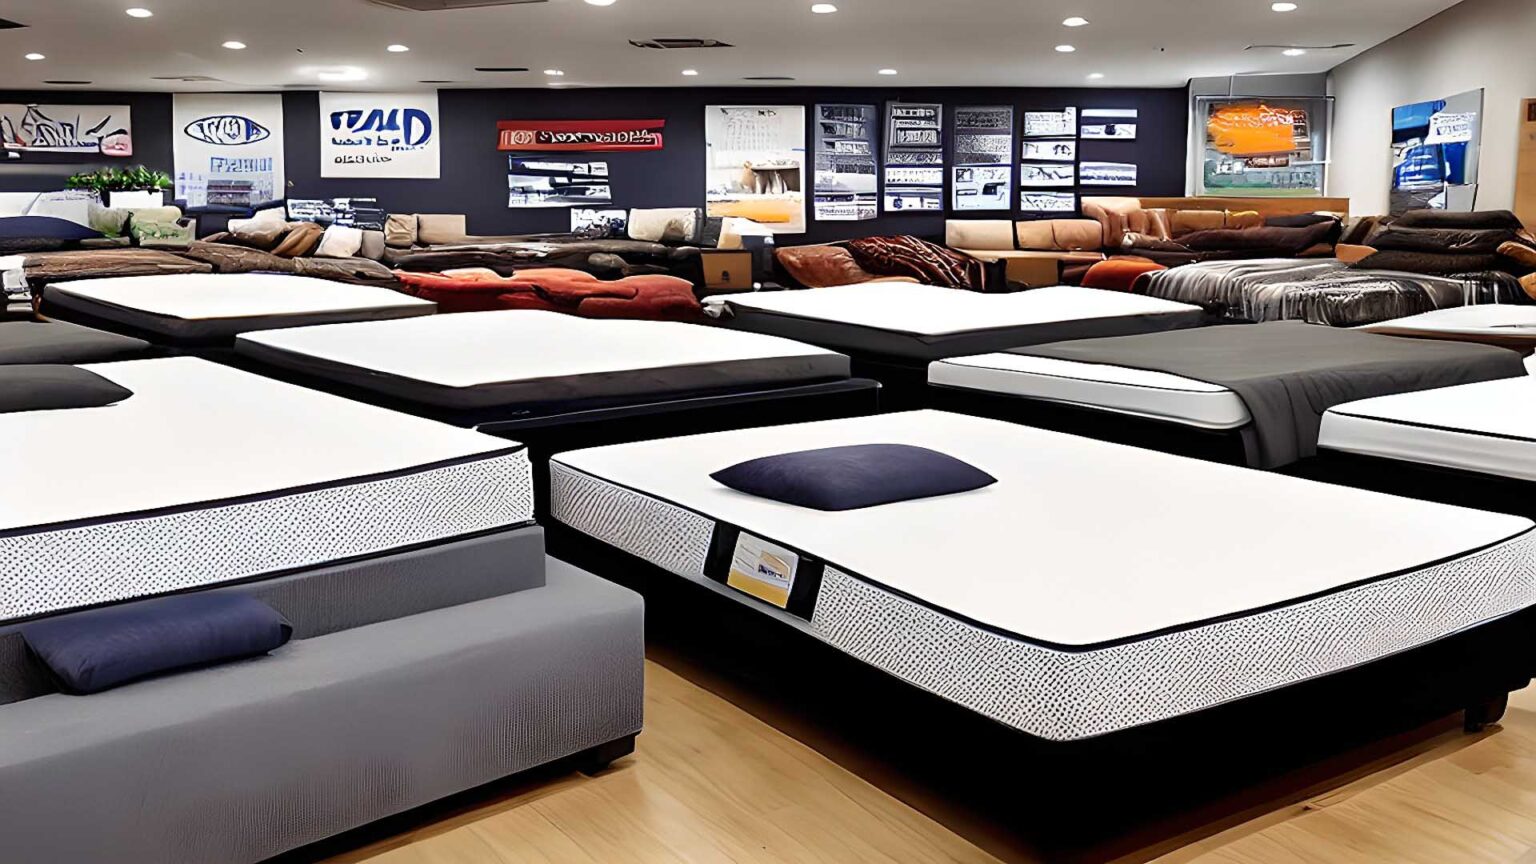 Mattress Stores, mattress dealers, and mattress retailers near me in Calexico, CA